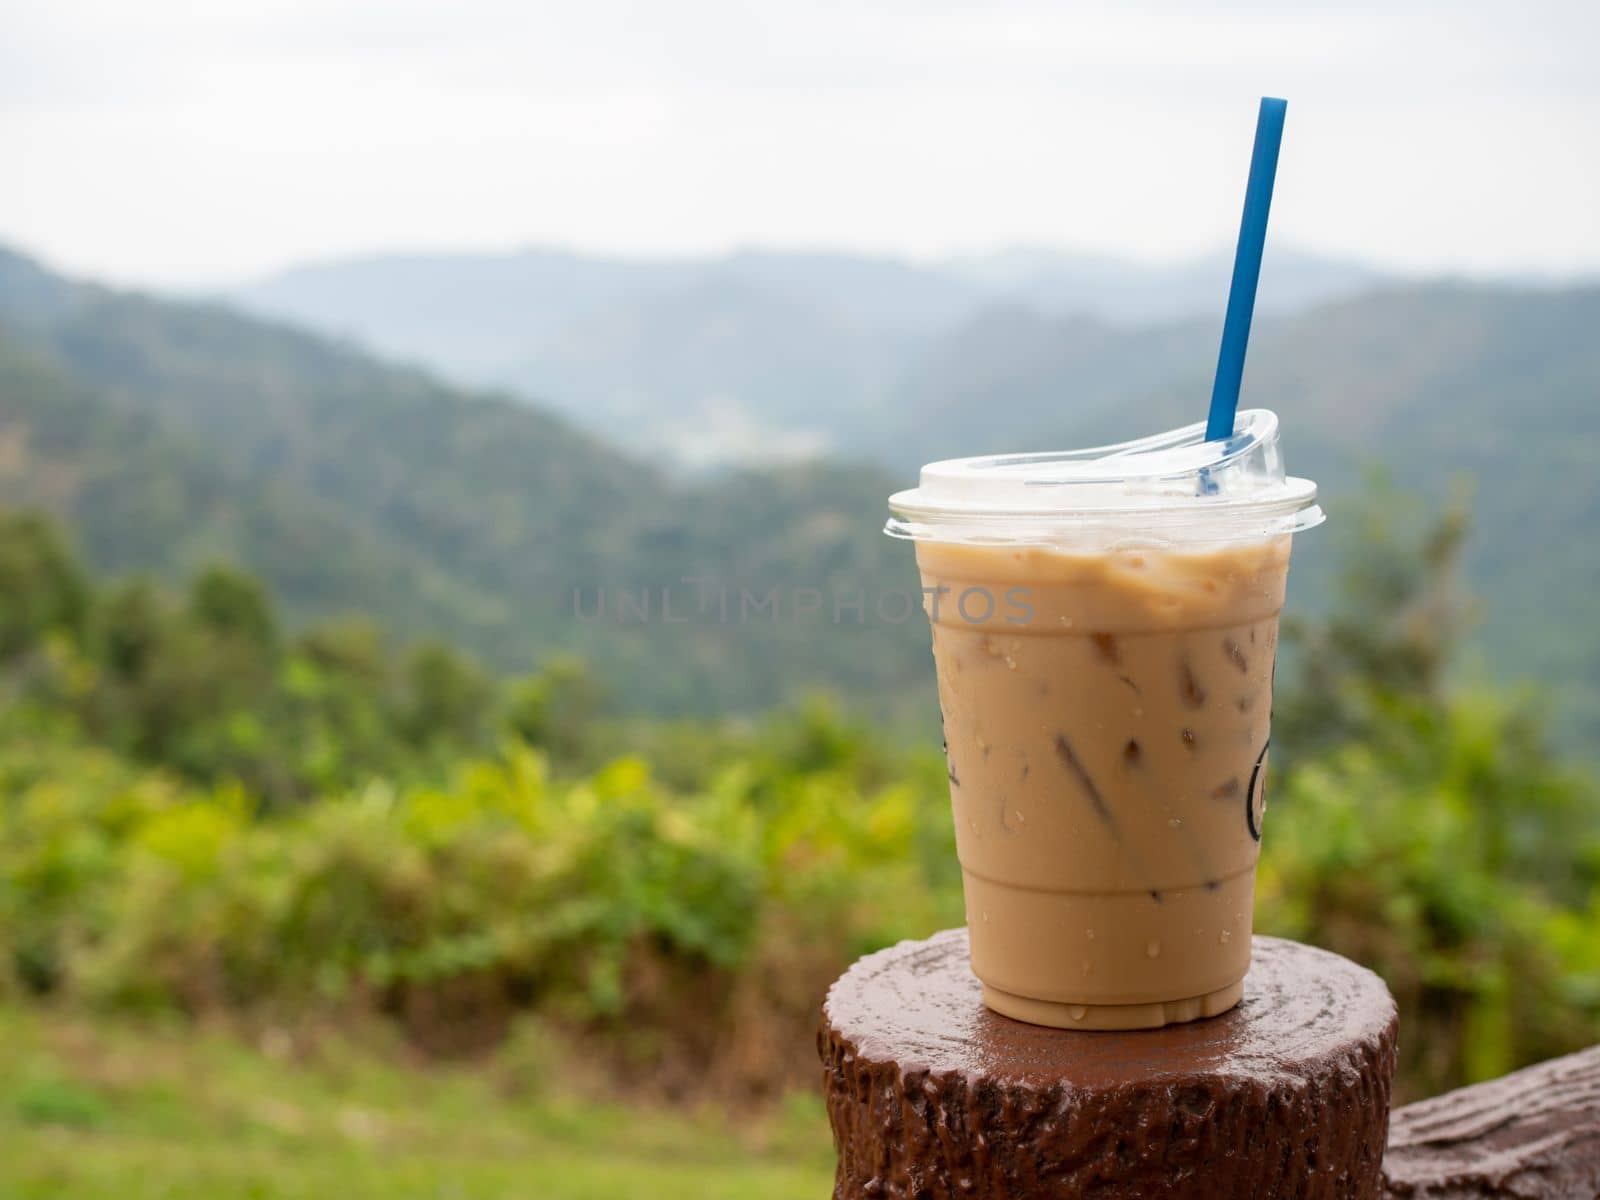 A glass of iced coffee is placed on the fence against a backdrop of mountains and sky.